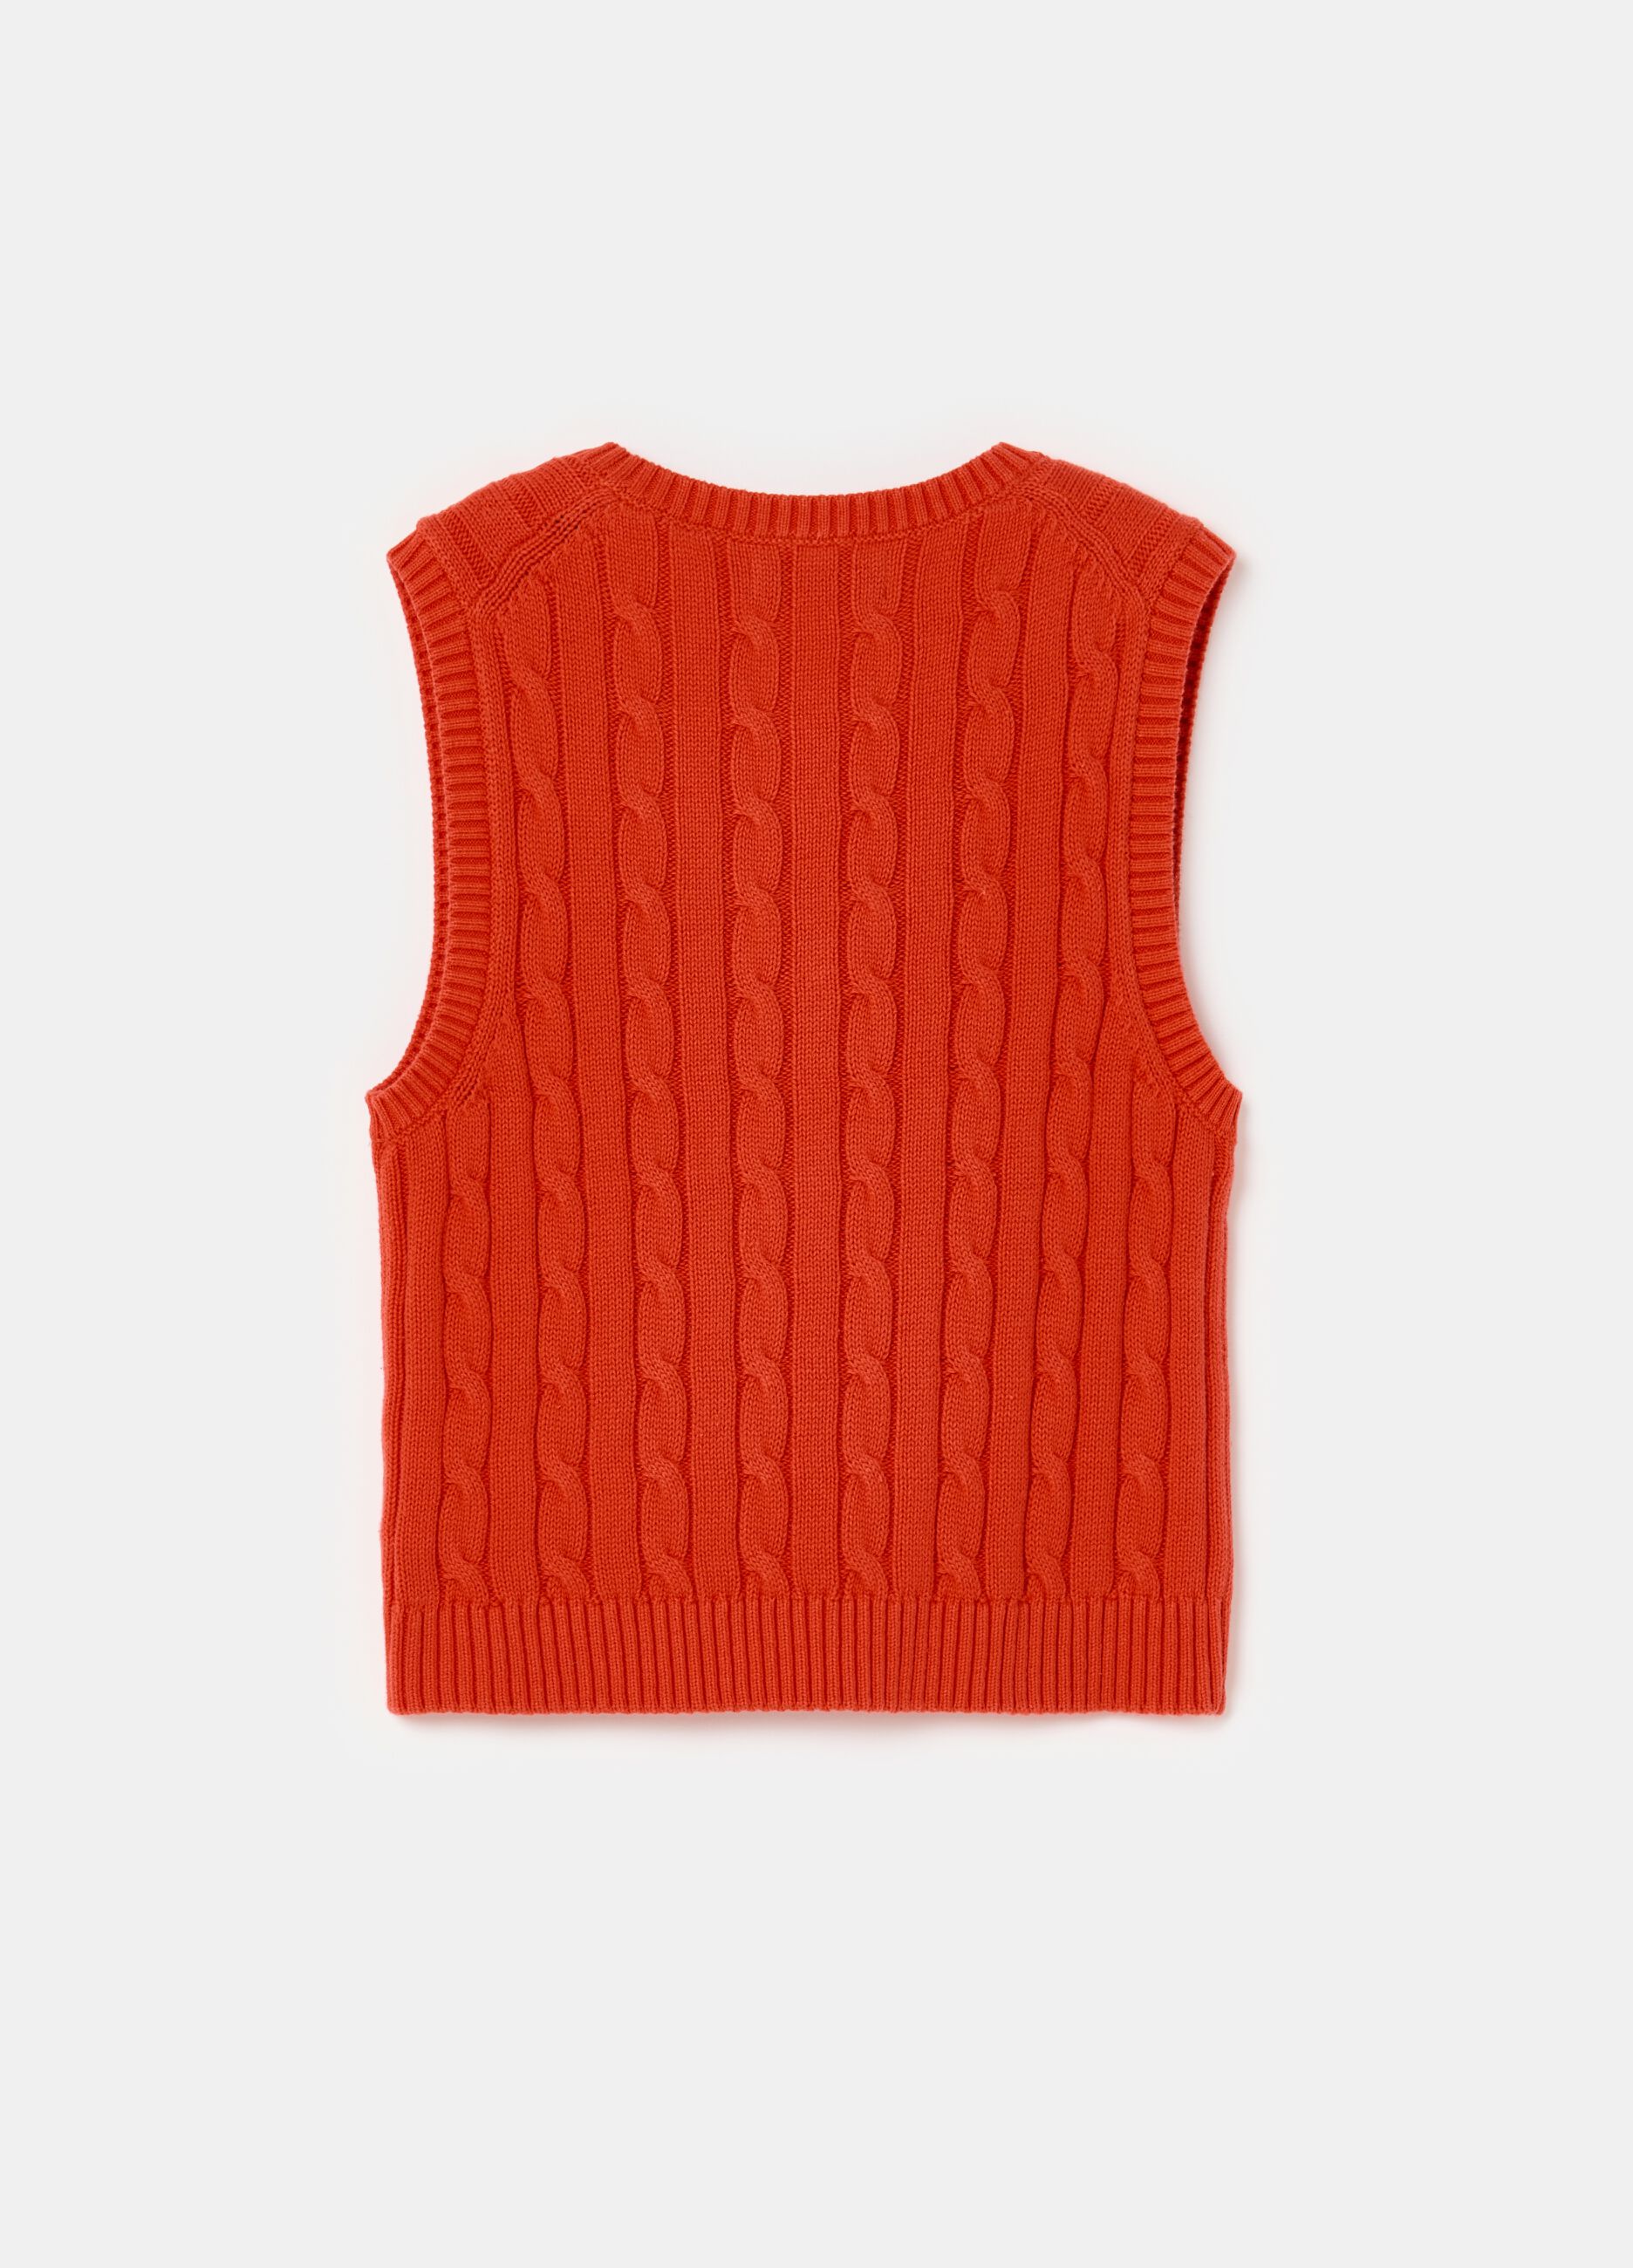 Ribbed closed gilet with cable-knit design